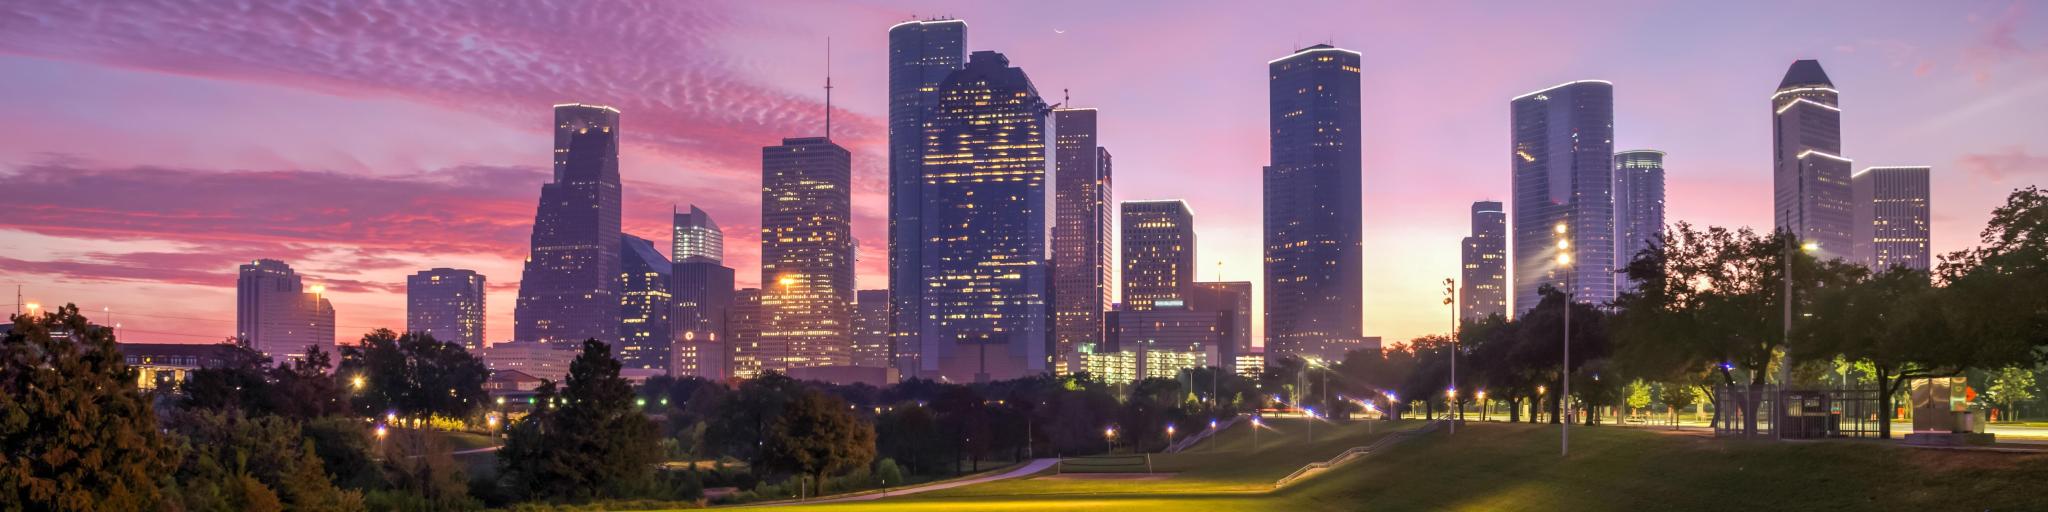 Houston, Texas at sunrise with dawn twilight with green park lawn and the skyline in the distance.